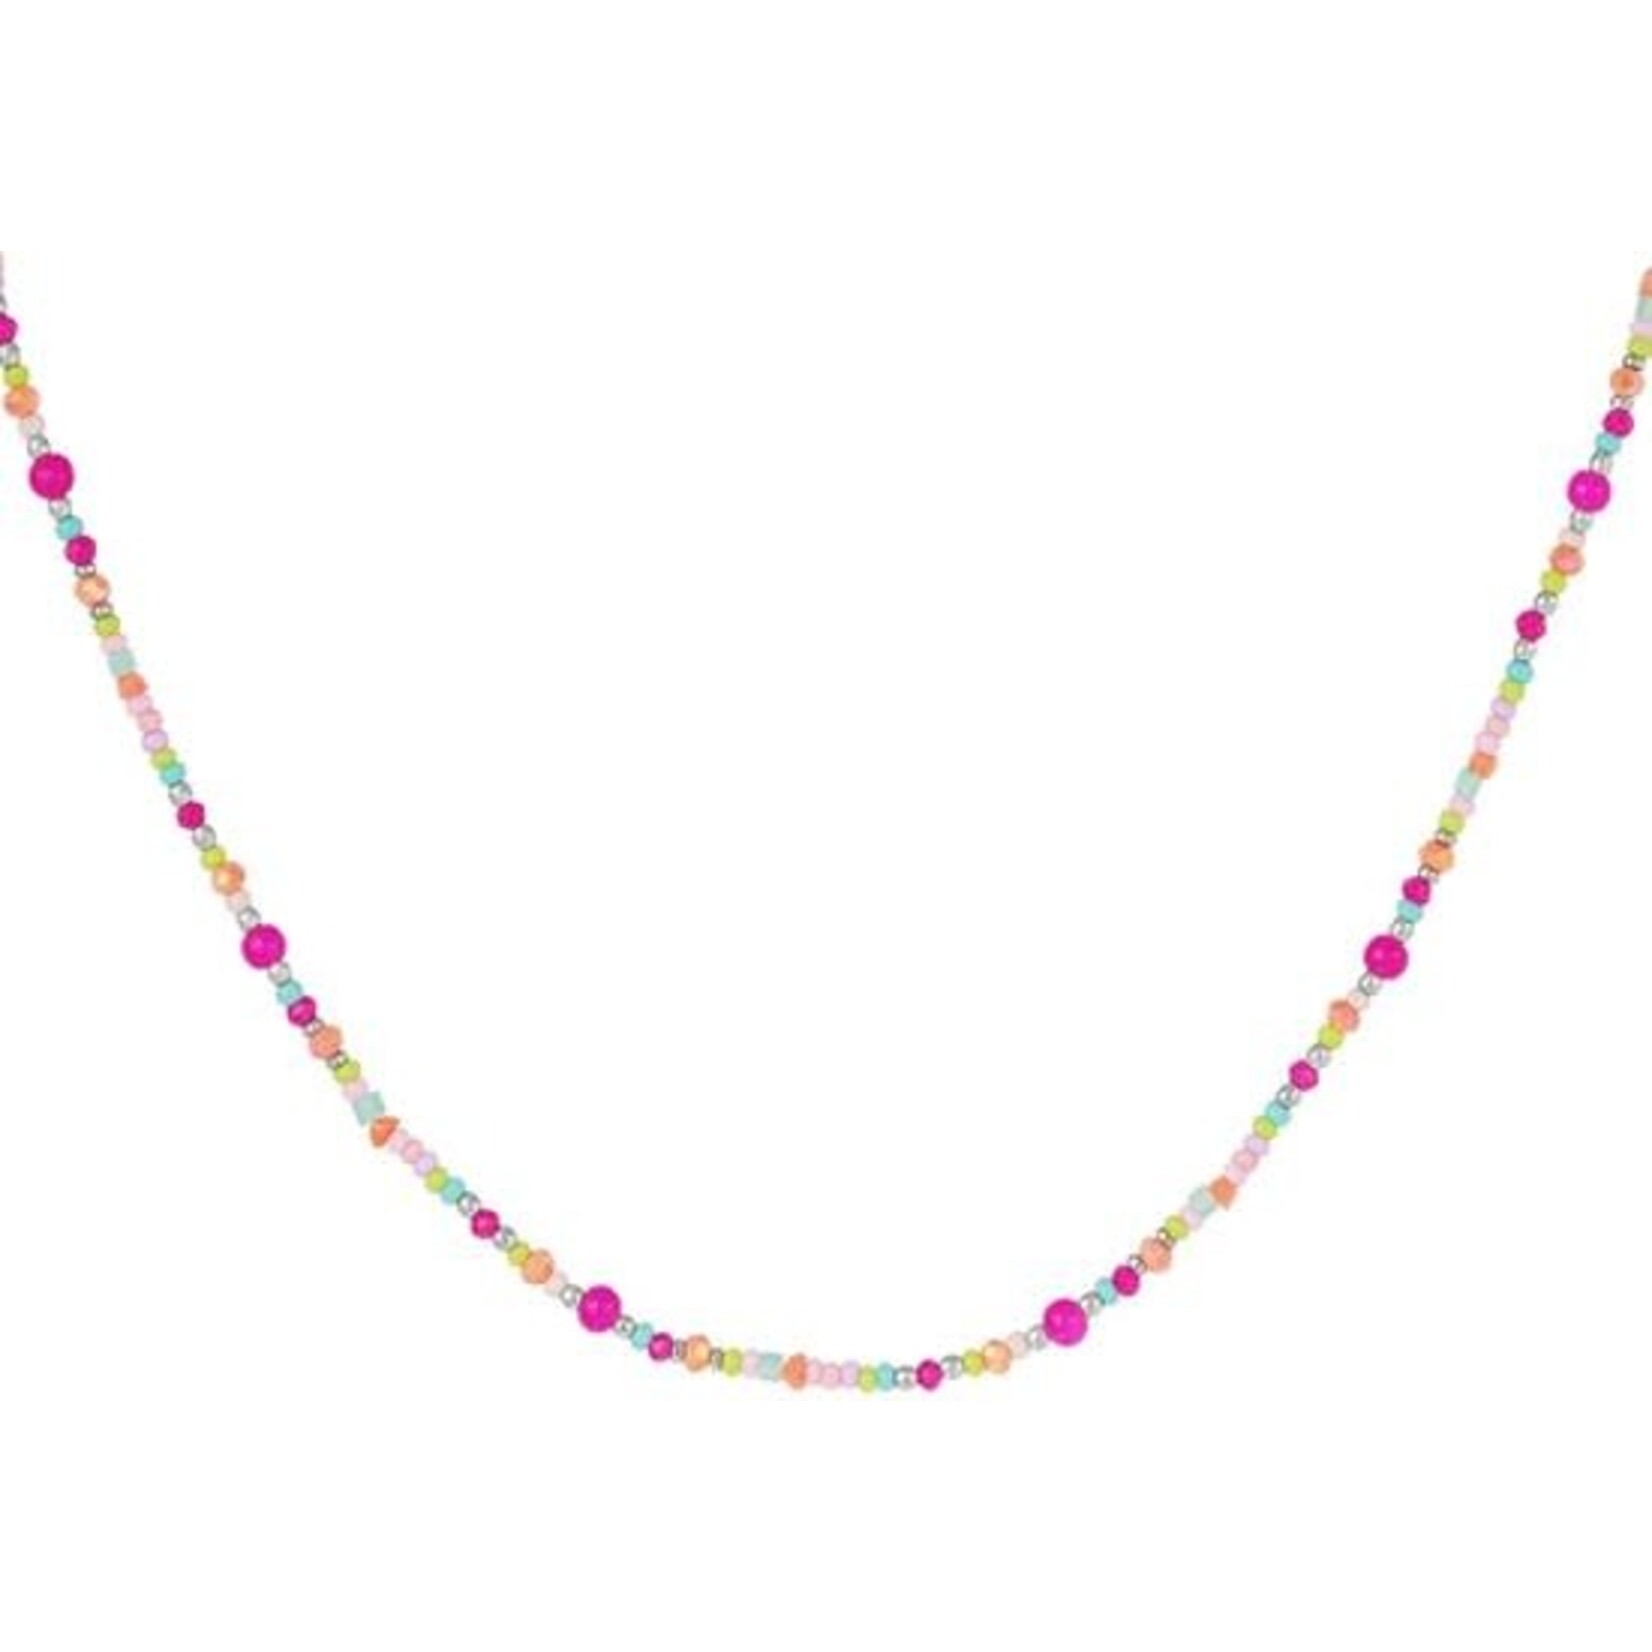 More the Firm Ketting summer beads pink